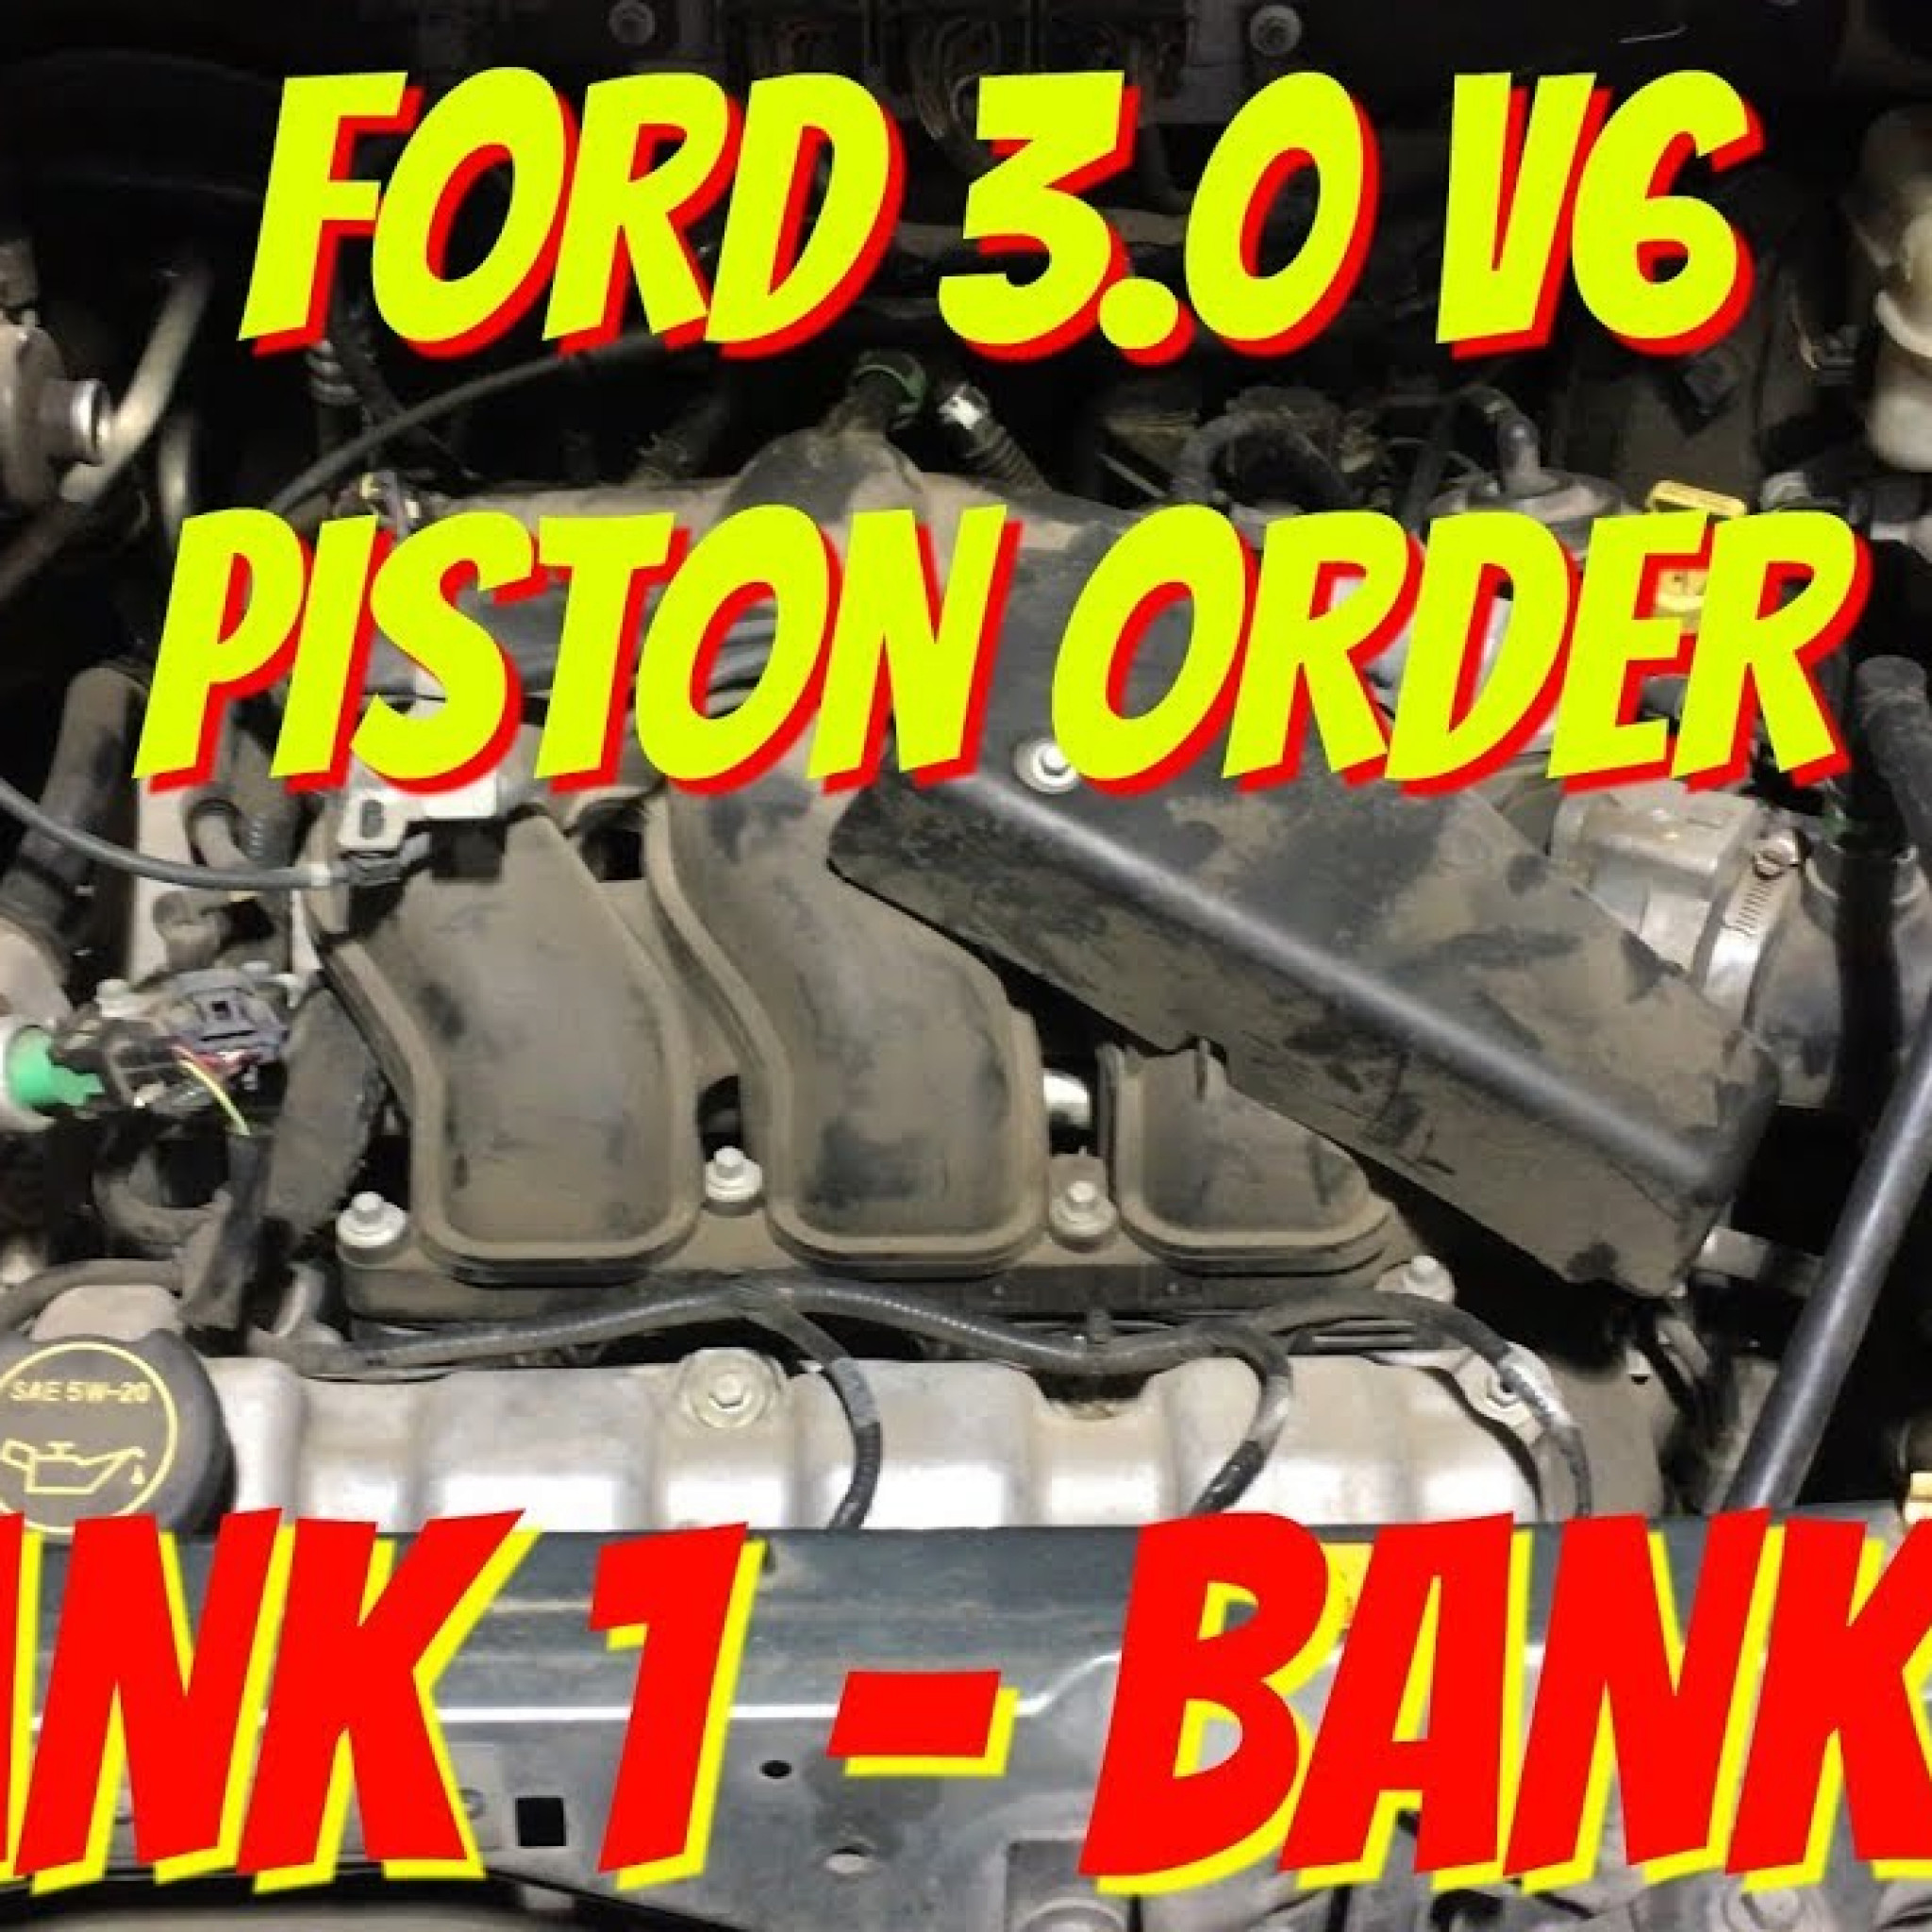 2005 Ford Freestyle 3.0 Firing Order | Wiring and Printable